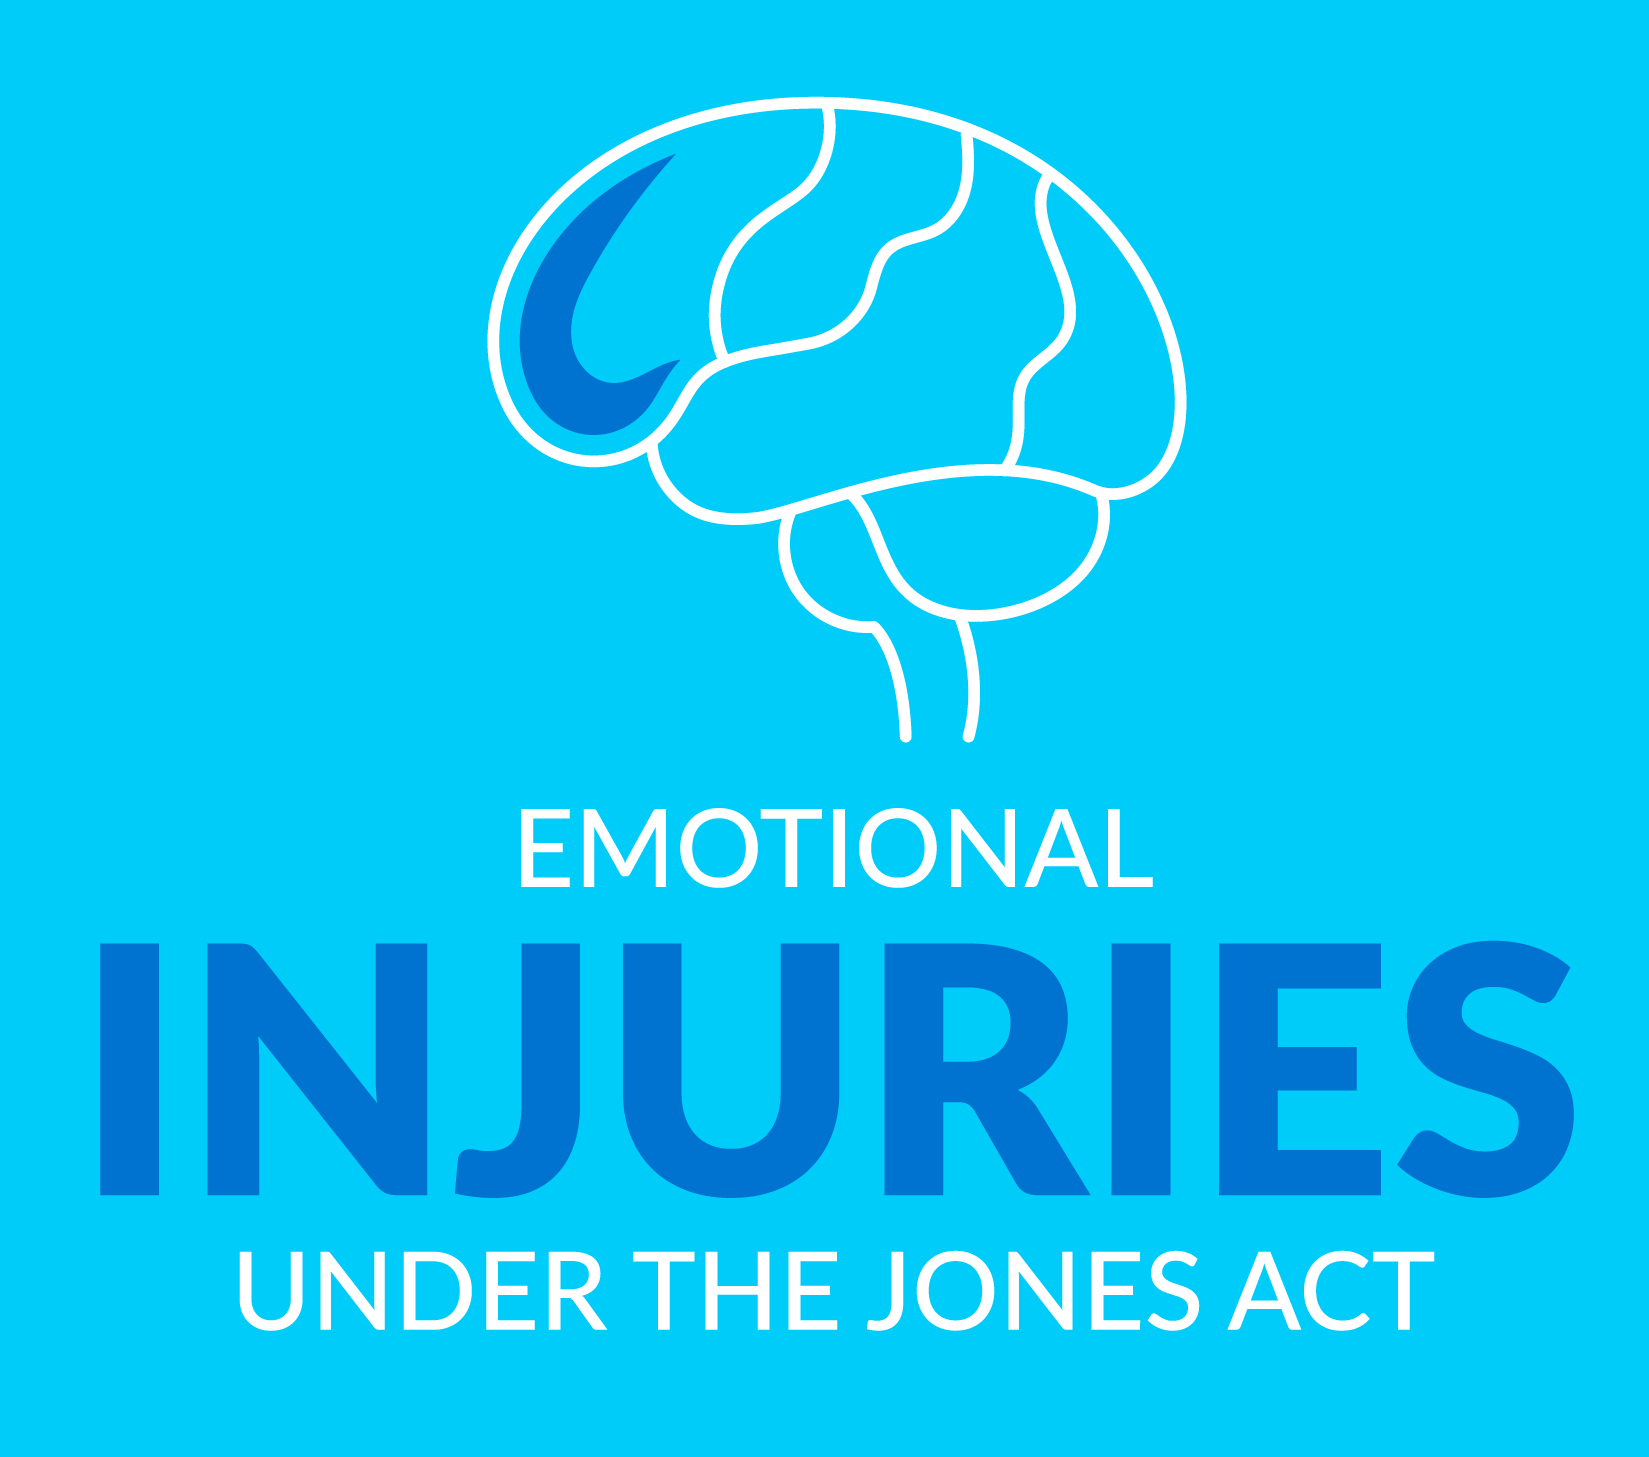 Emotional Injuries Under the Jones Act Infographic